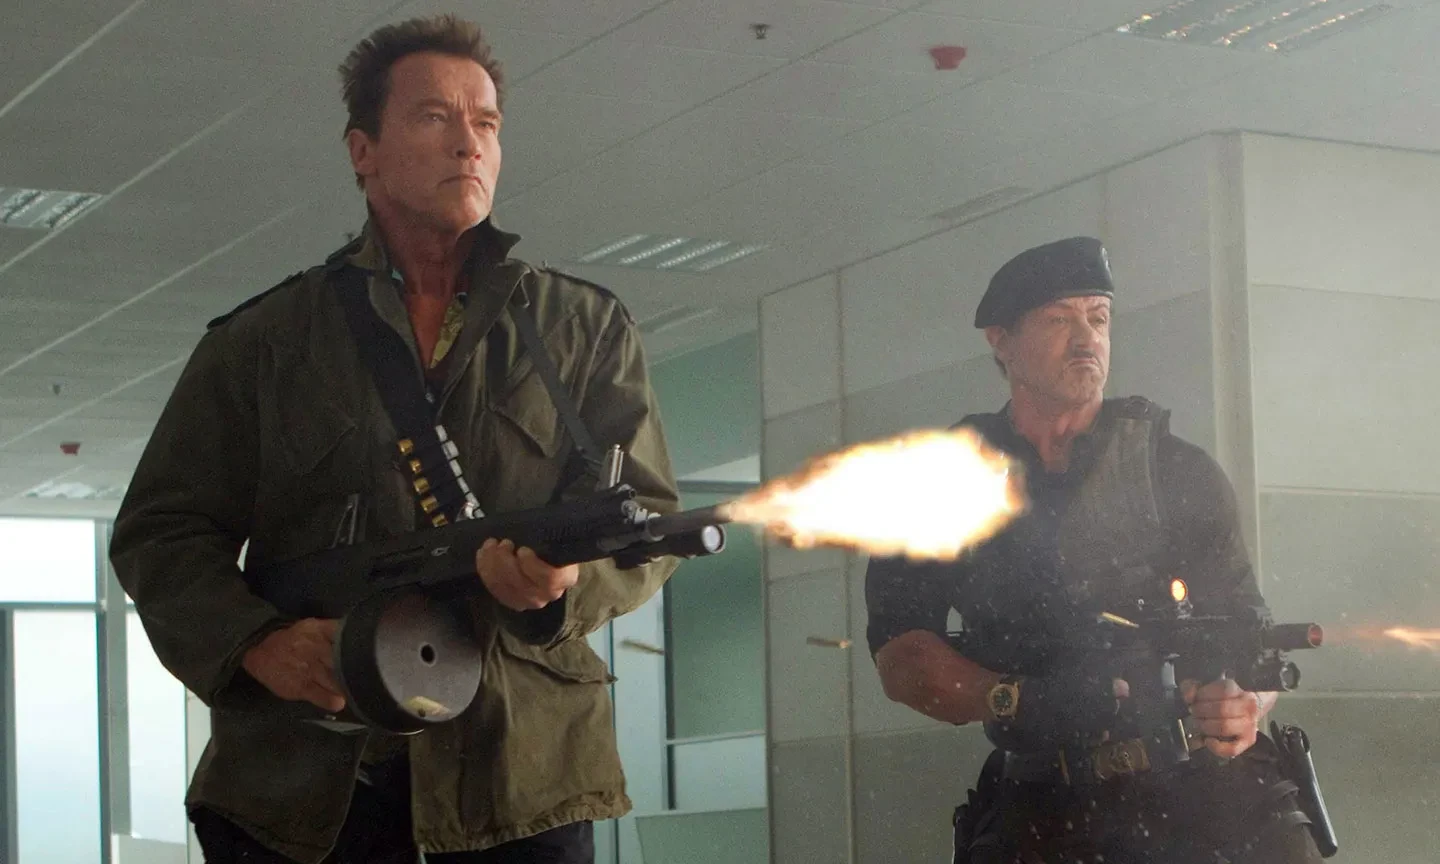 Arnold Schwarzenegger along with Sylvester Stallone in the Expendables 2.